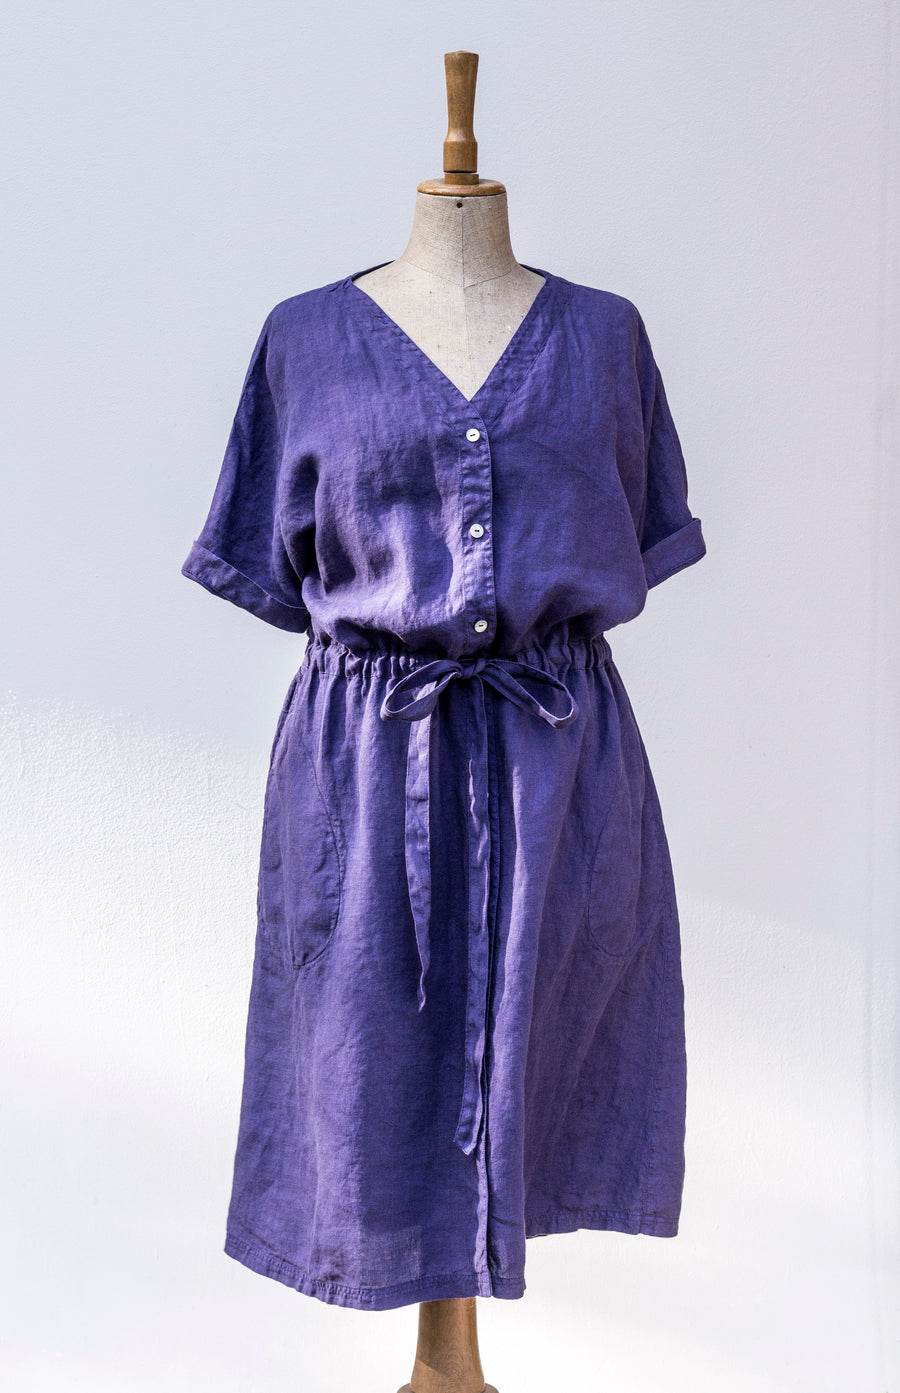 Extra soft shift dress in Orient Blue shade